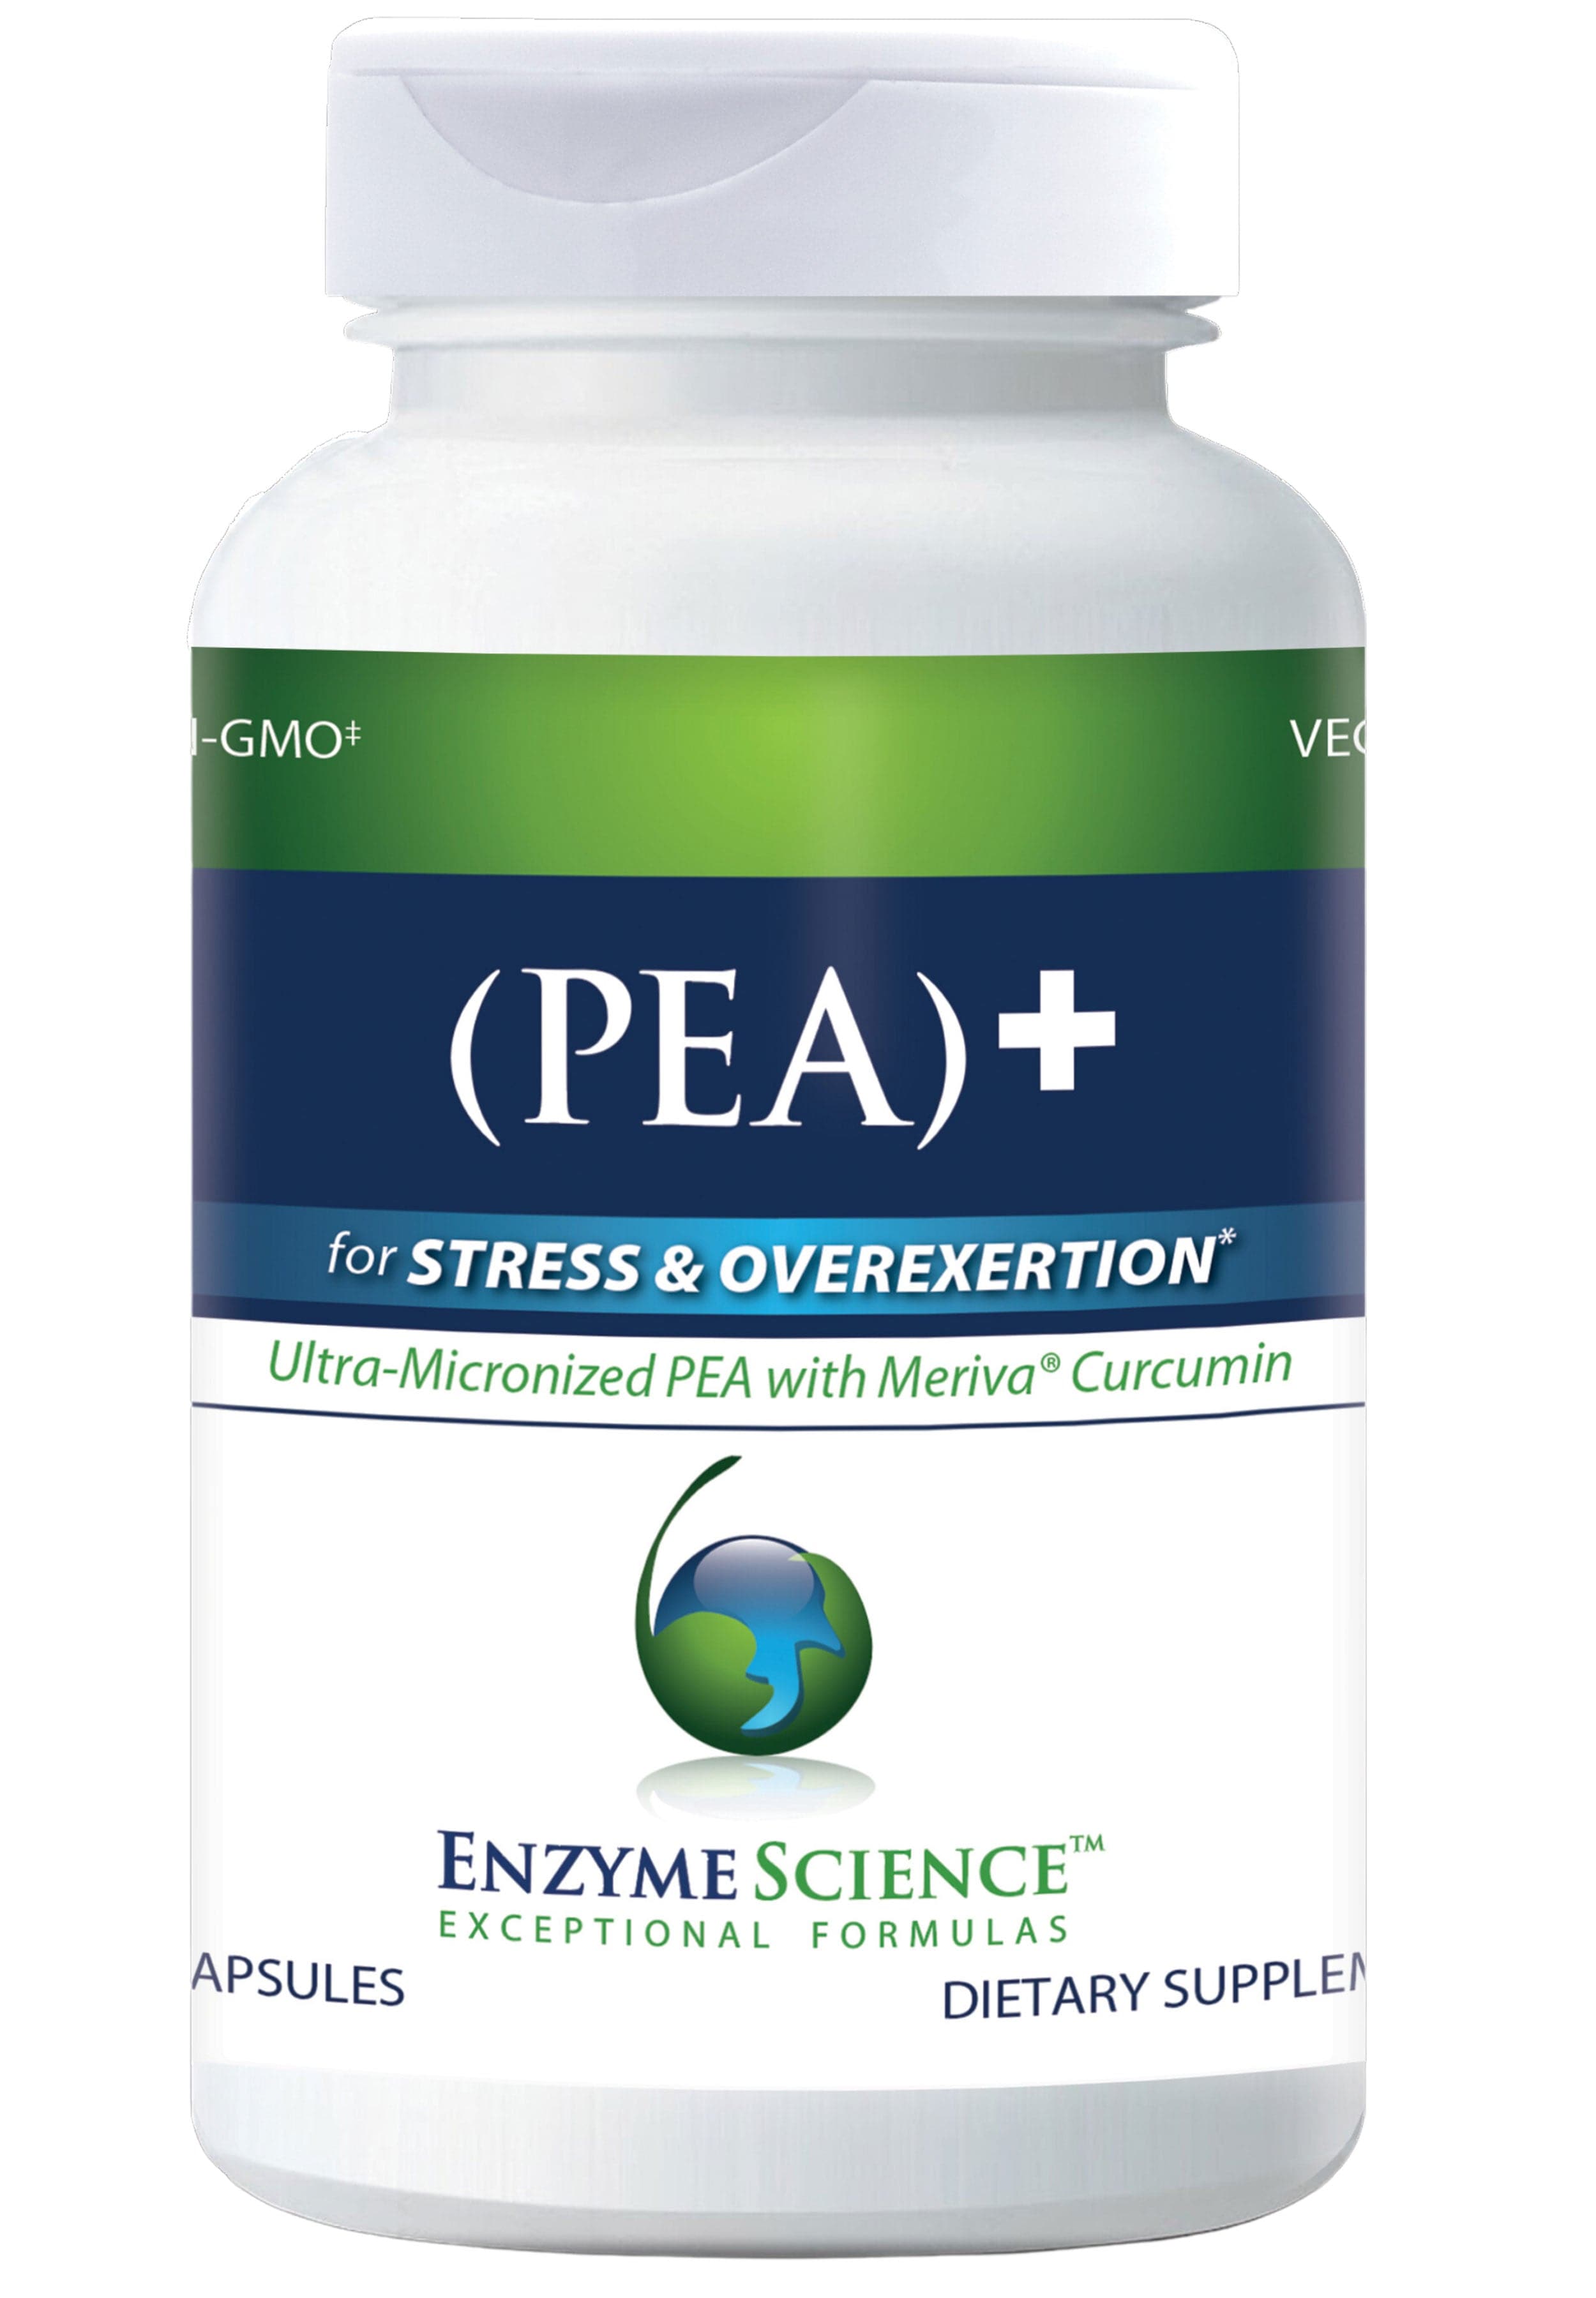 Enzyme Science (PEA) +